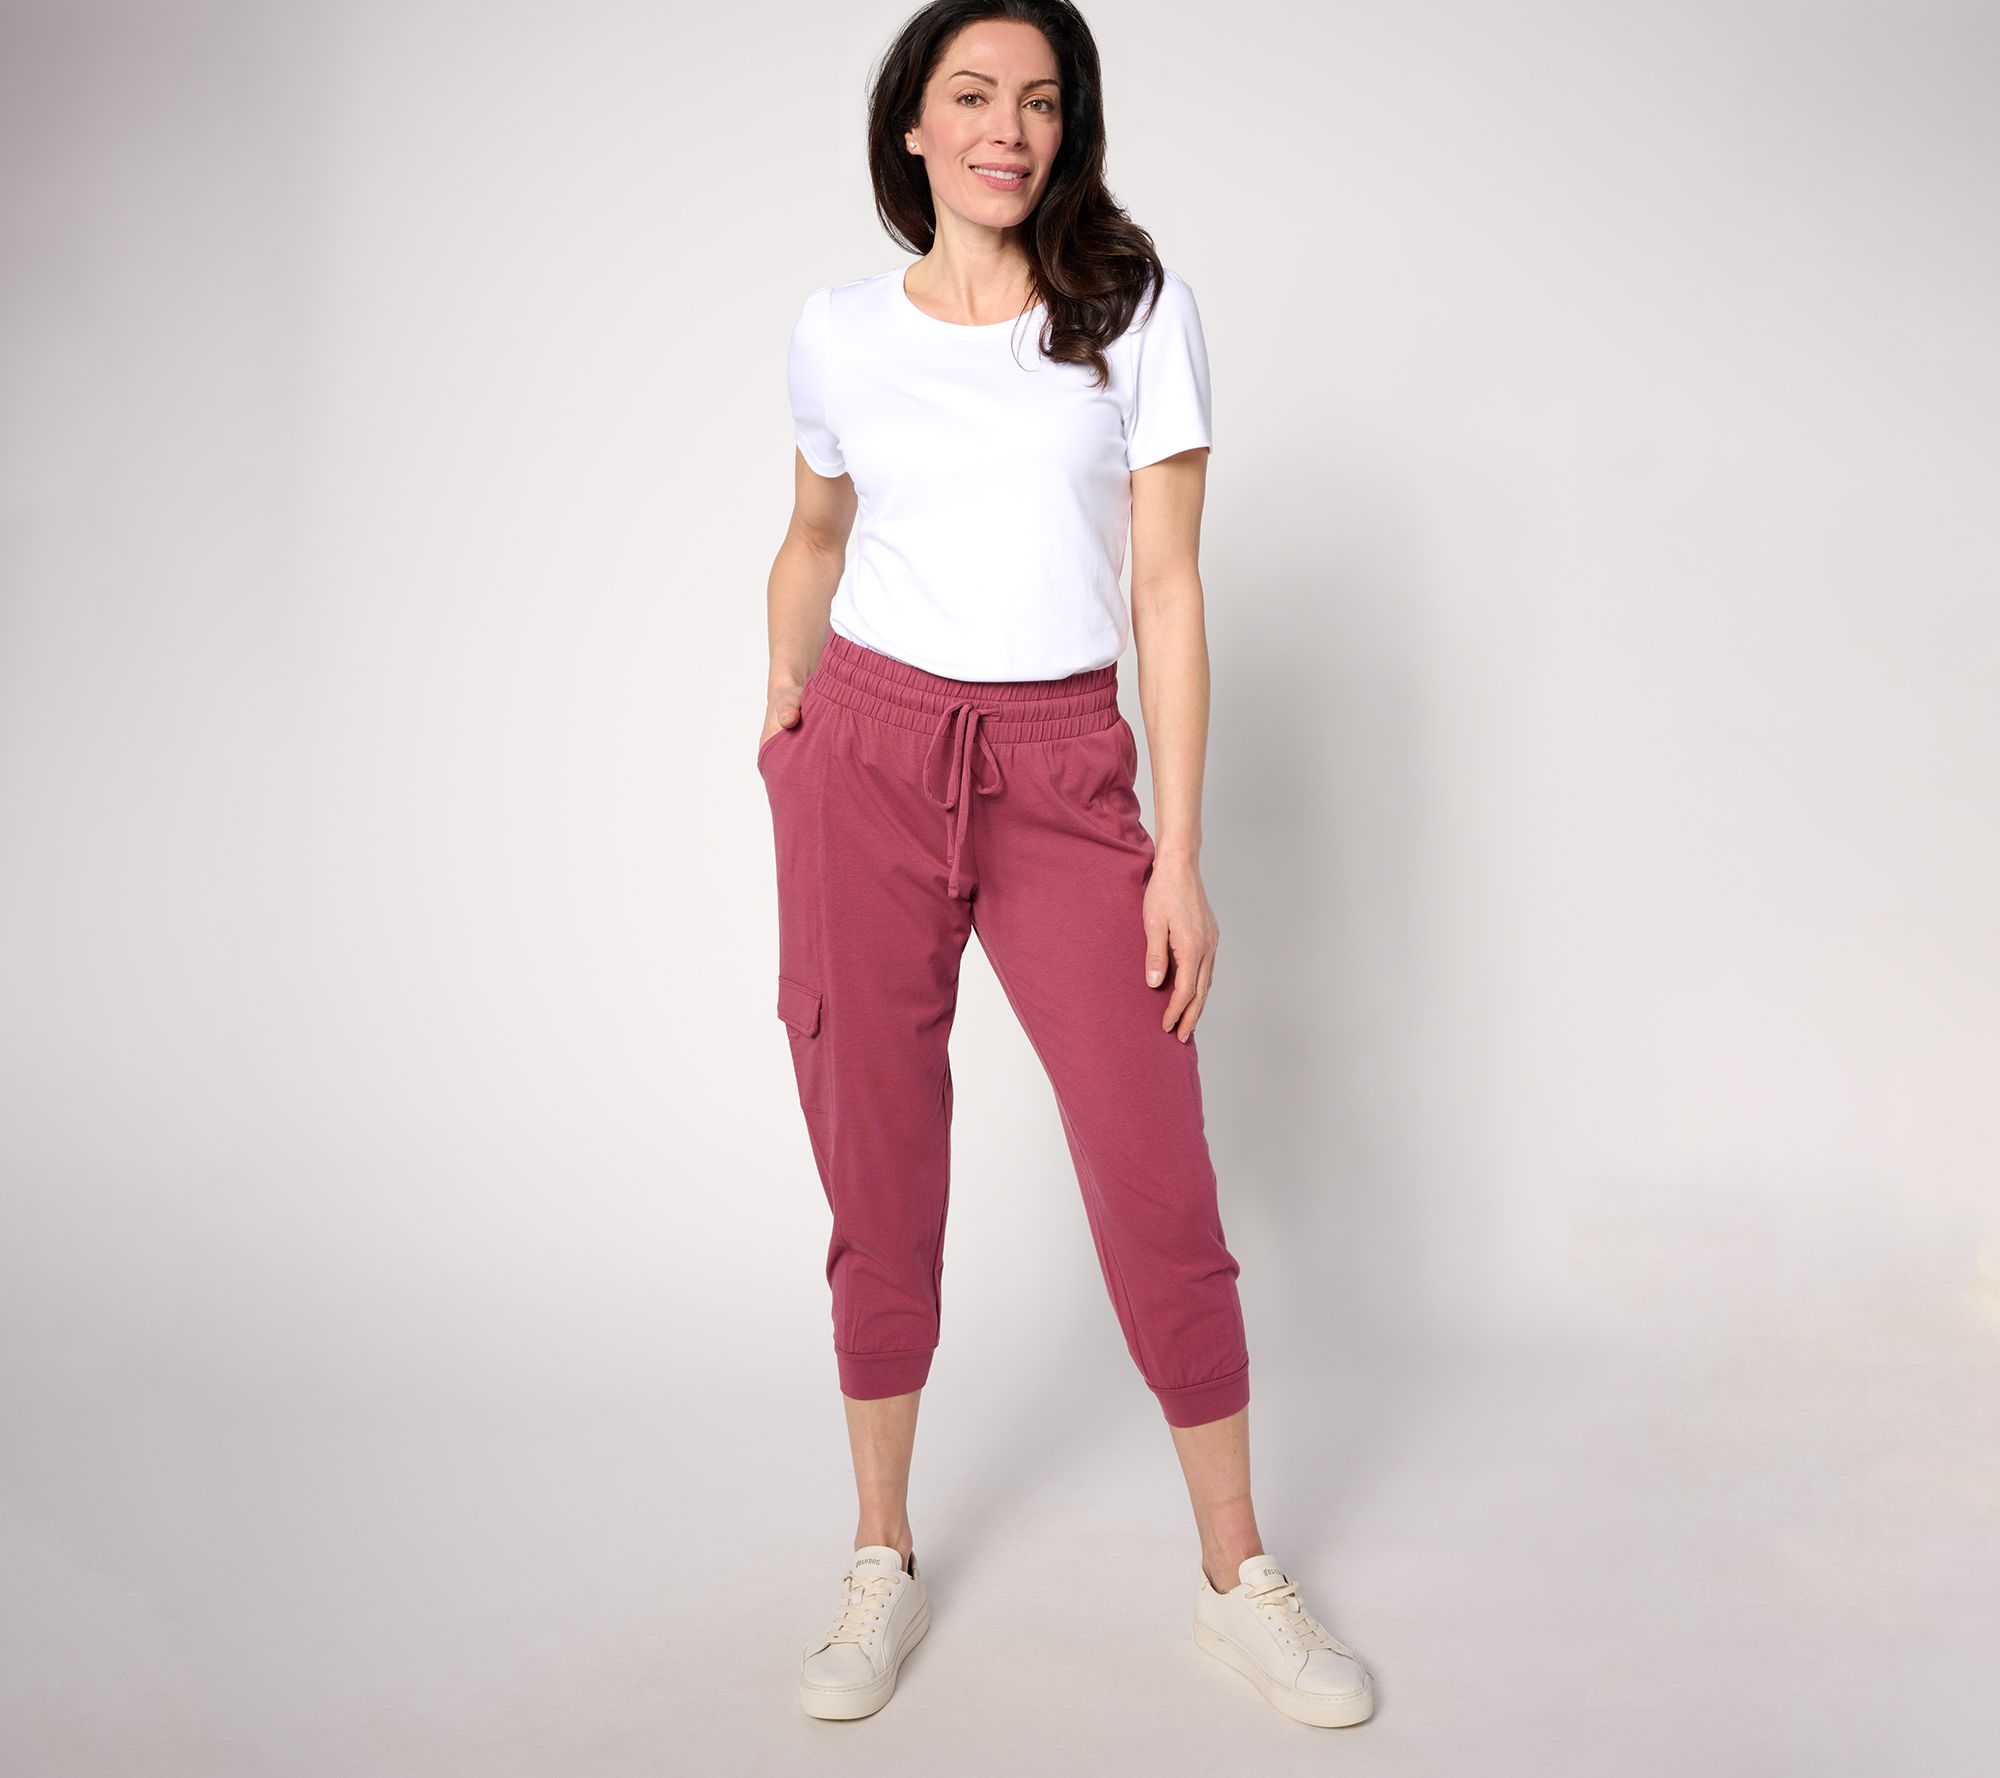 AnyBody Lounge Cozy Knit Cropped Cargo Jogger - QVC.com